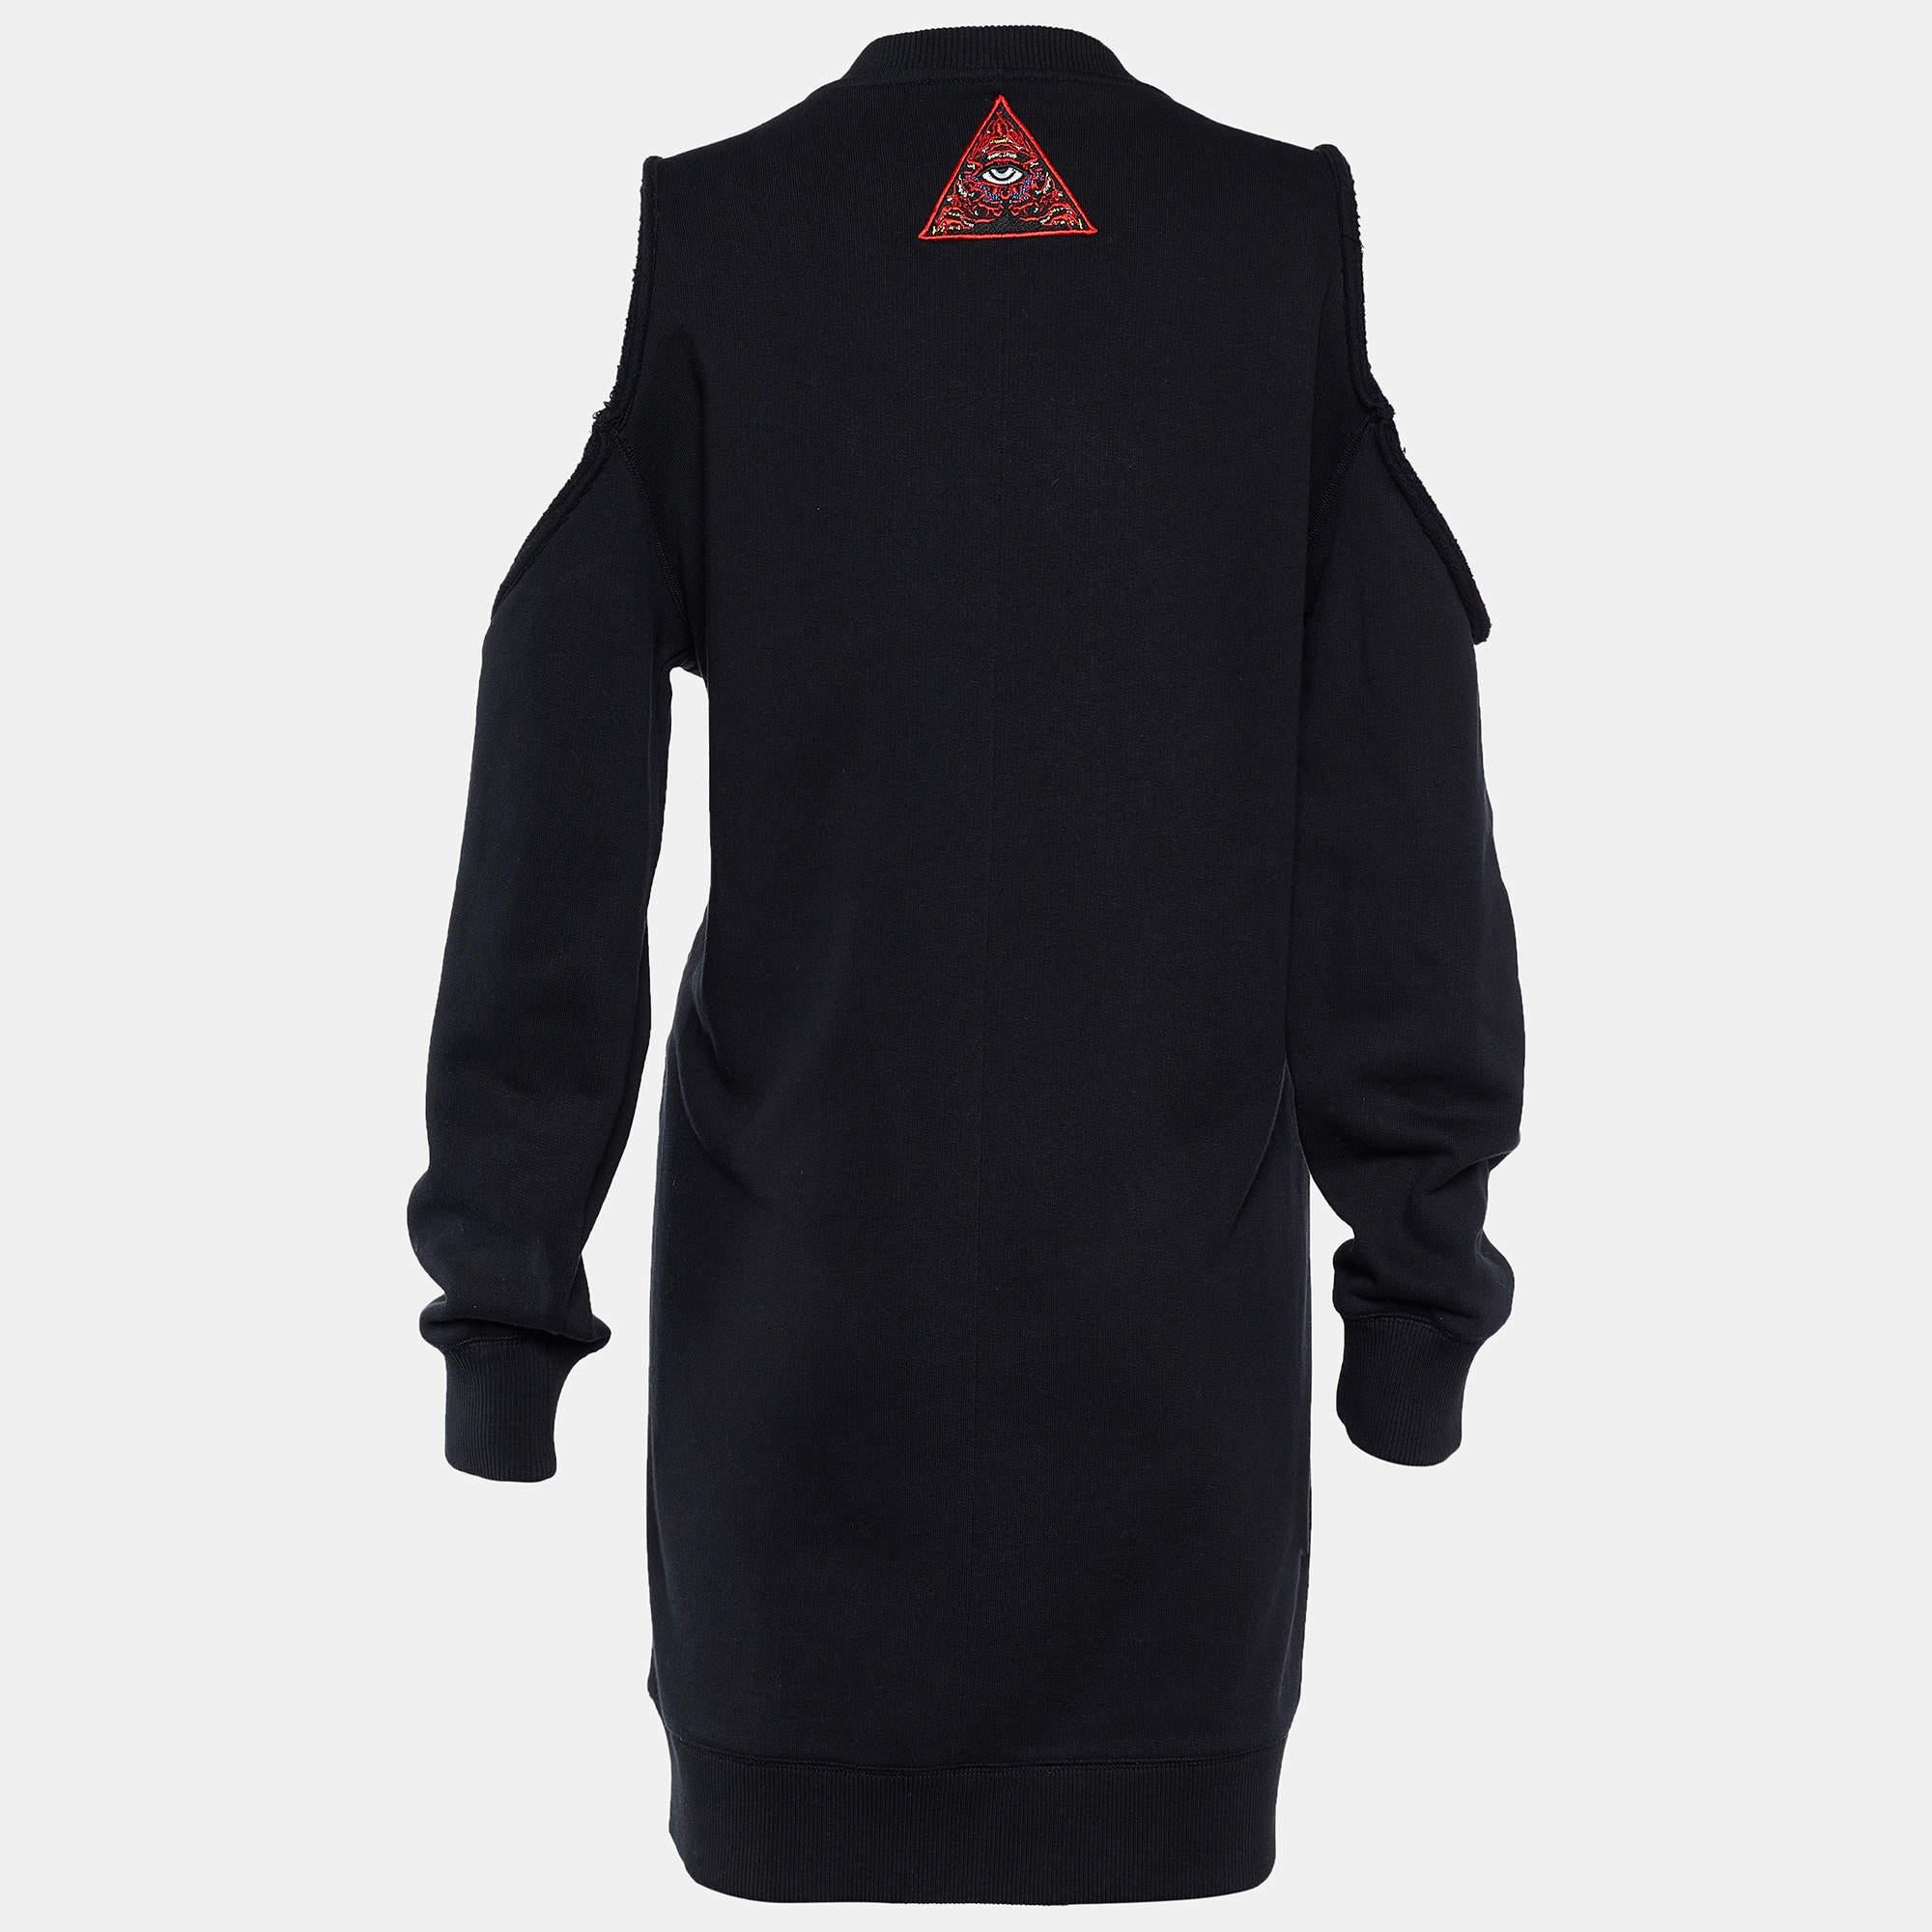 Make a classy fashion statement as you wear this shift dress from the House of Givenchy. Tailored using black cotton fabric, the back of this dress is embellished with multicolored eye embroidery. It is further enhanced with cold-shoulder detailed